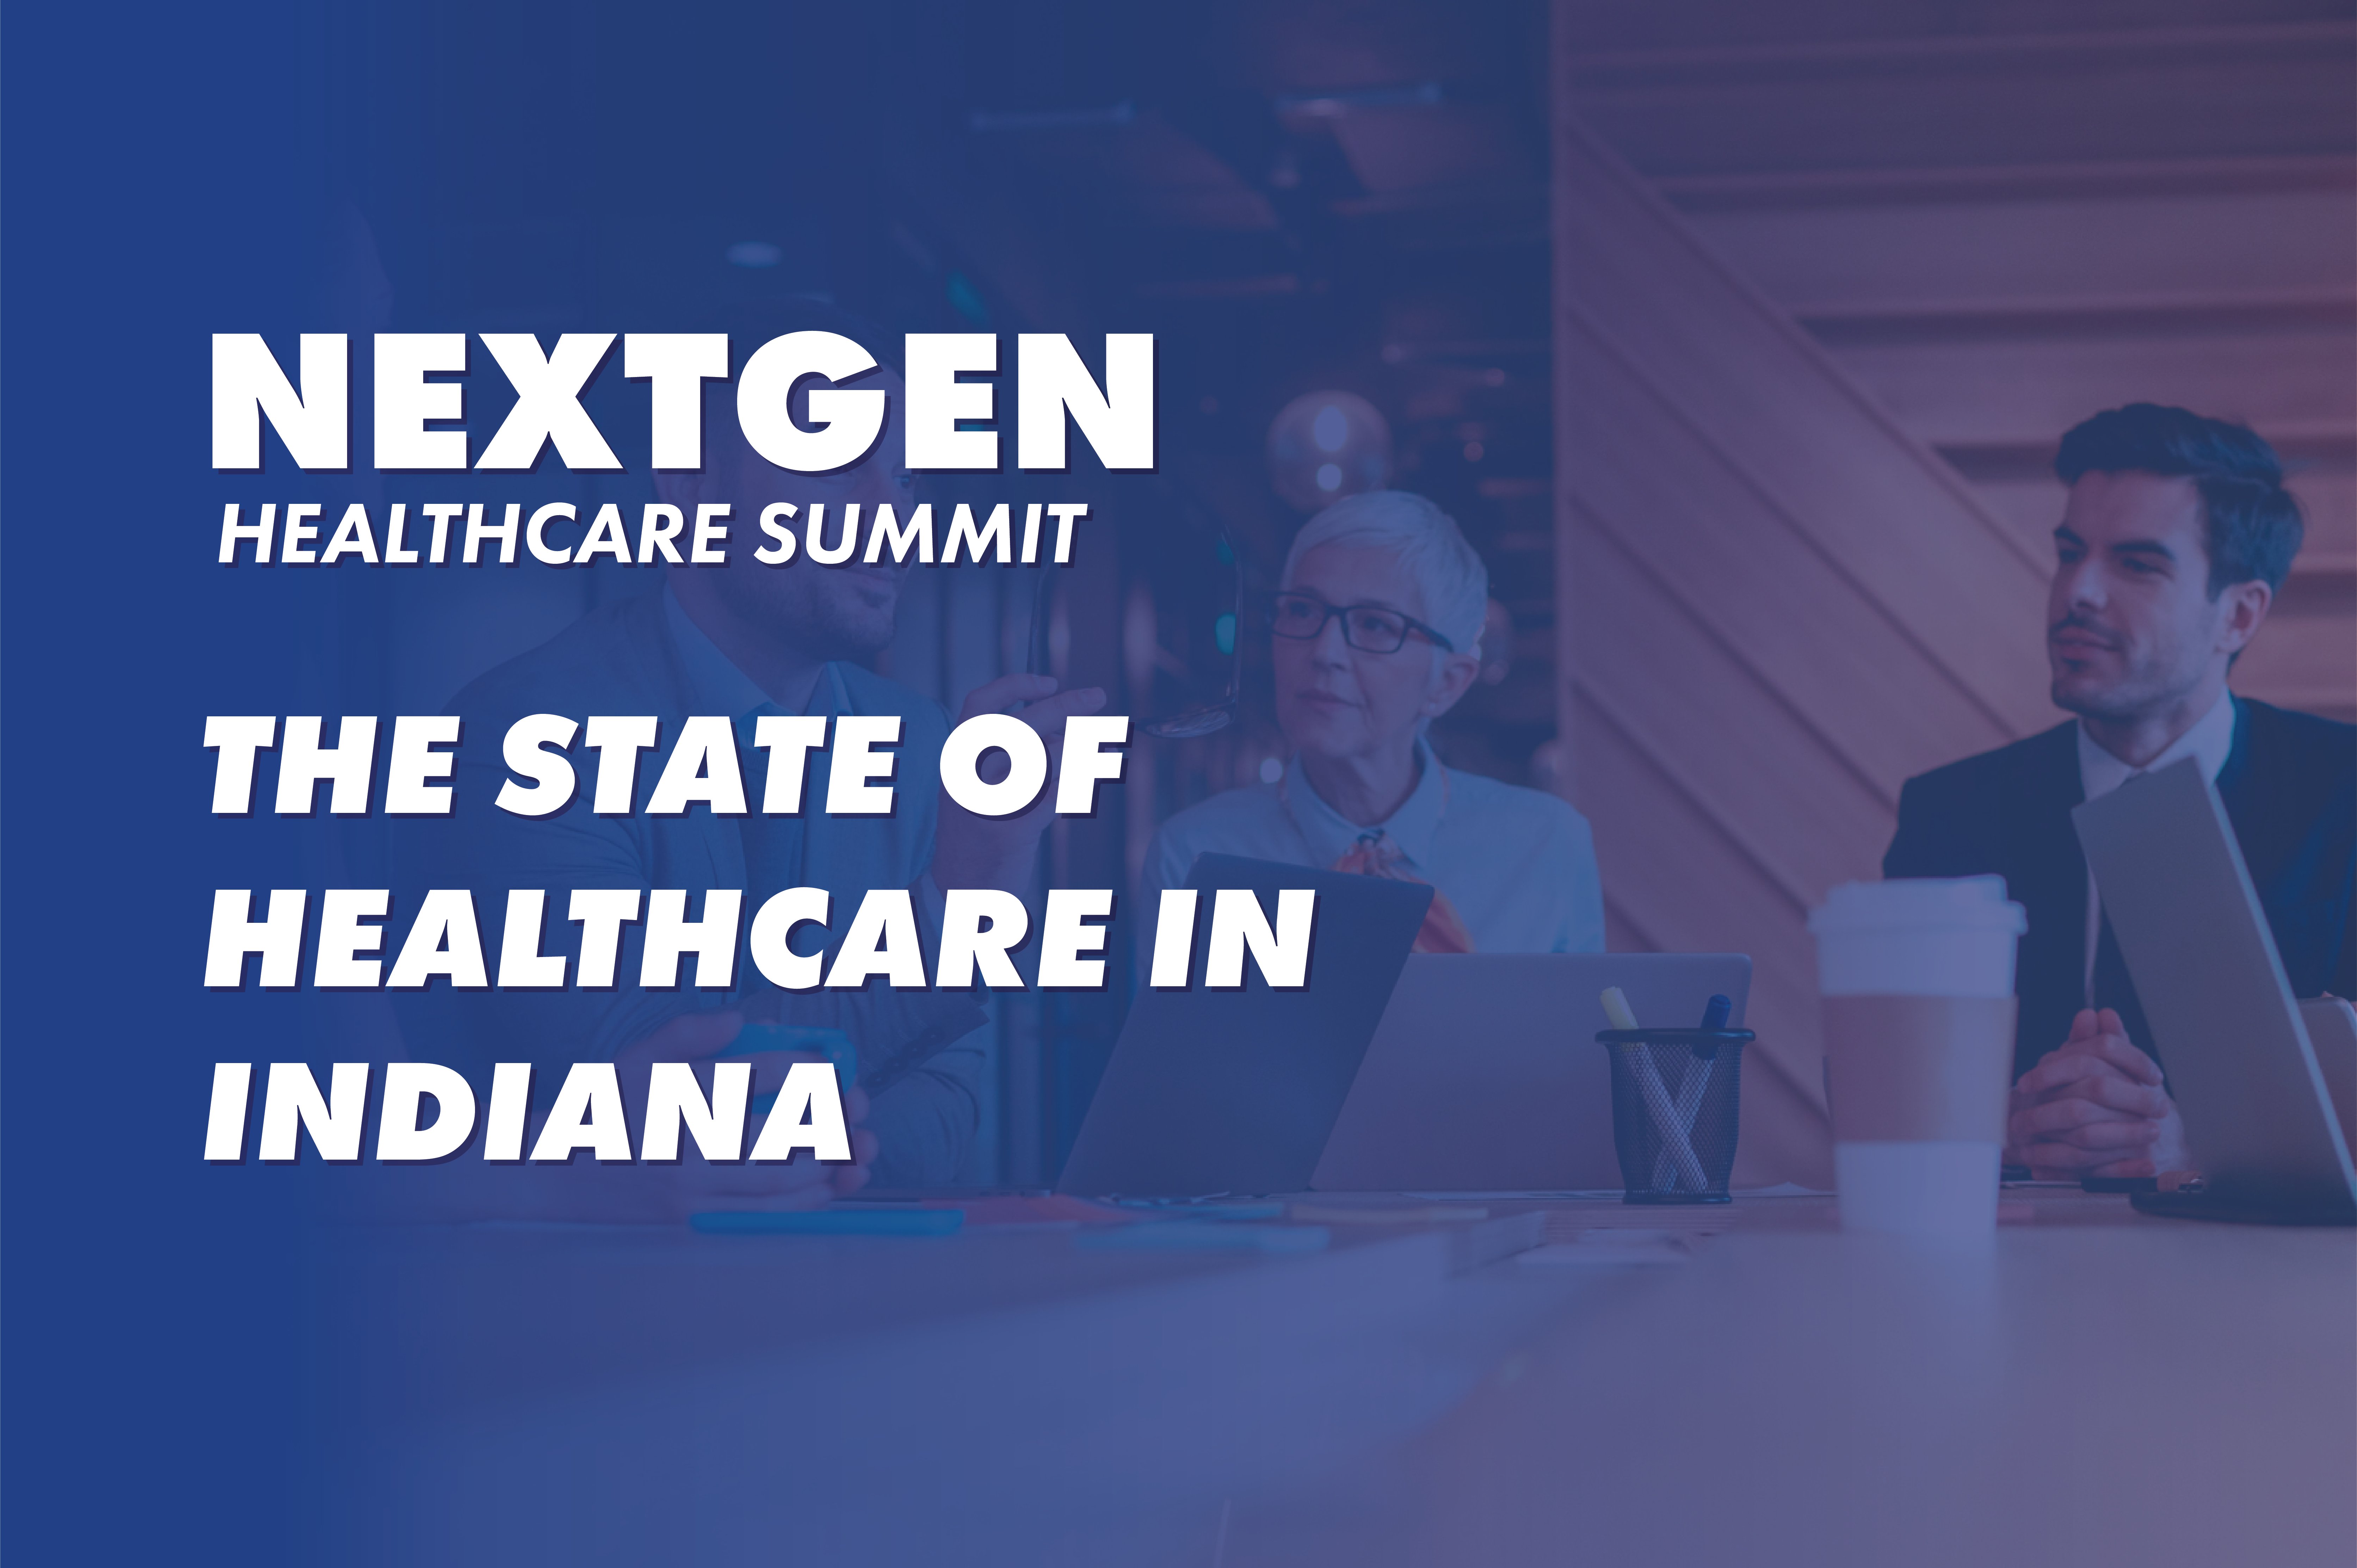 The State of Healthcare in Indiana